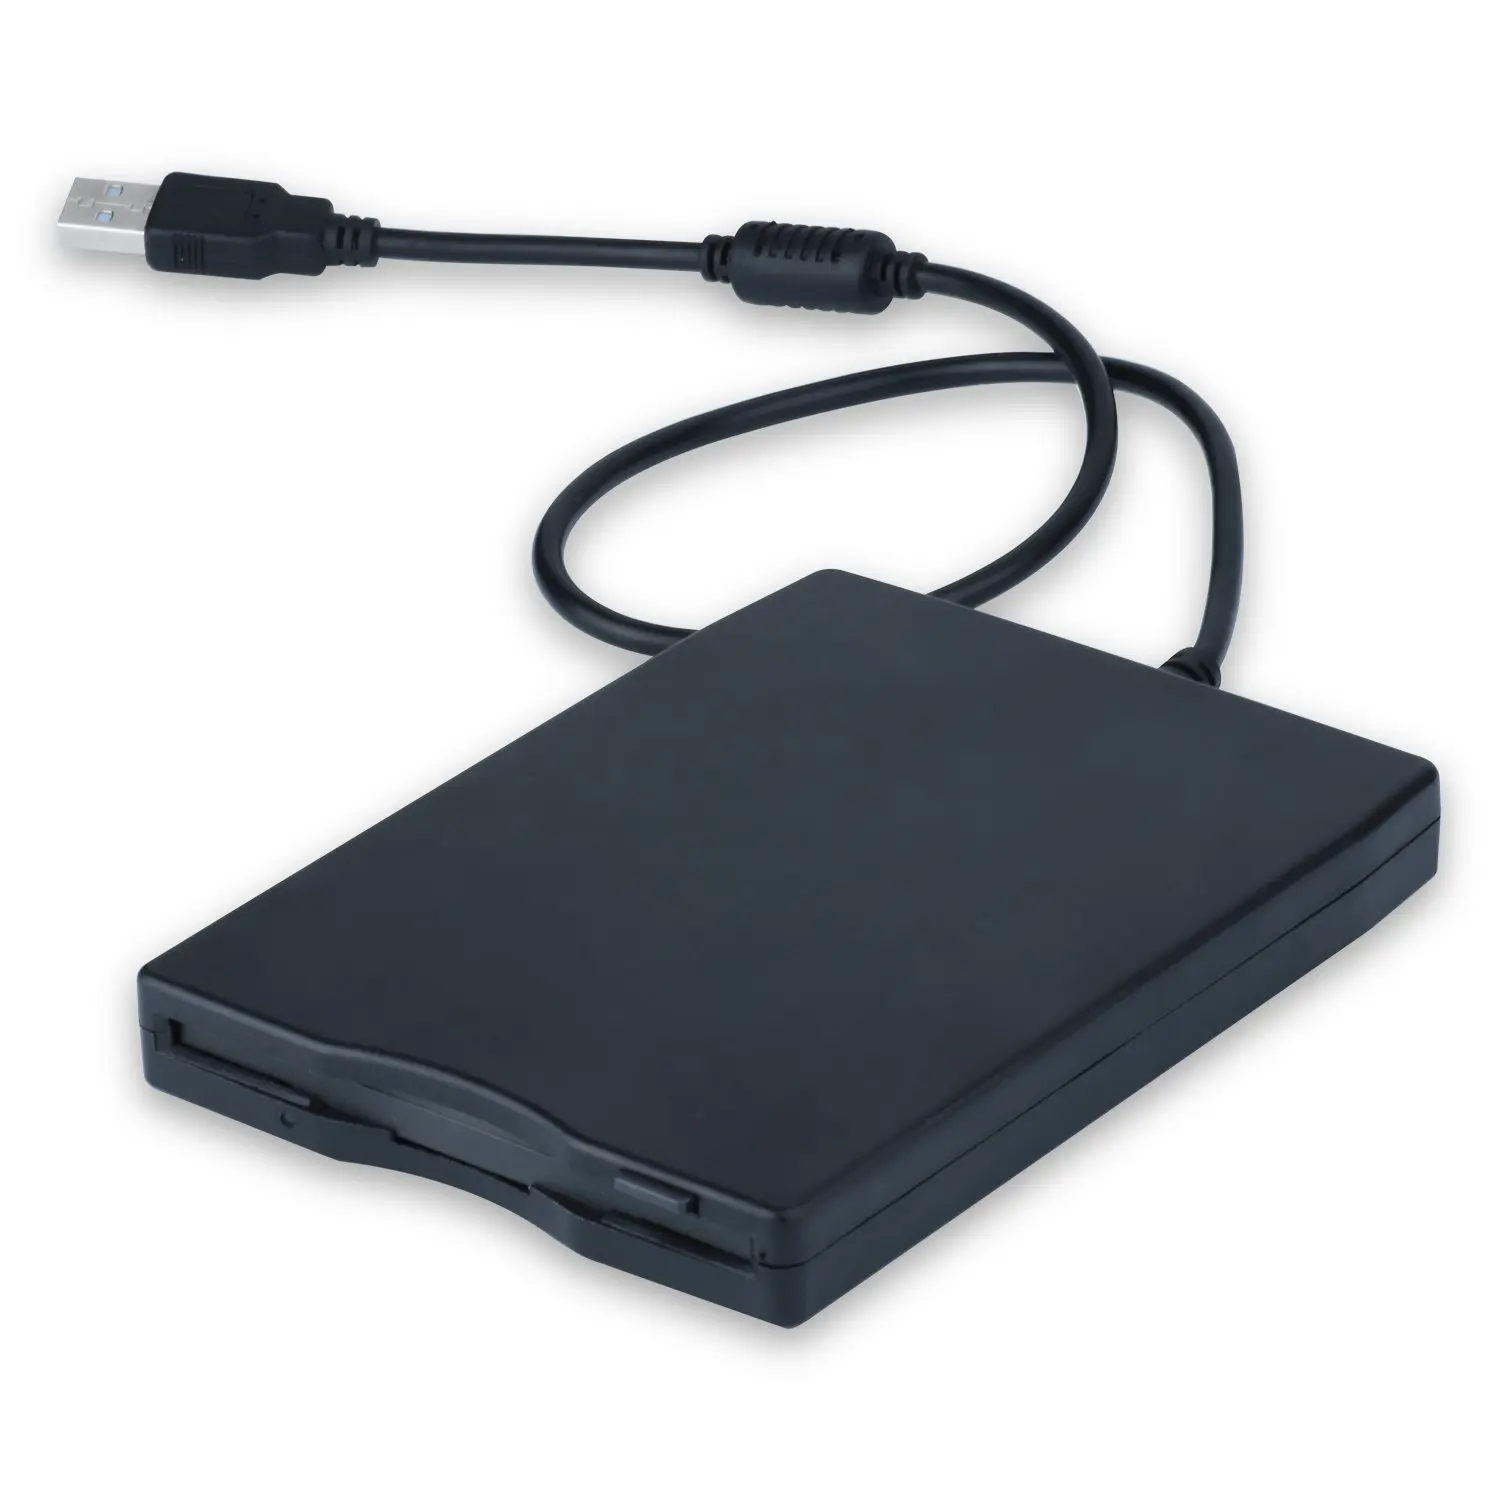 Usb portable diskette driver for mac download